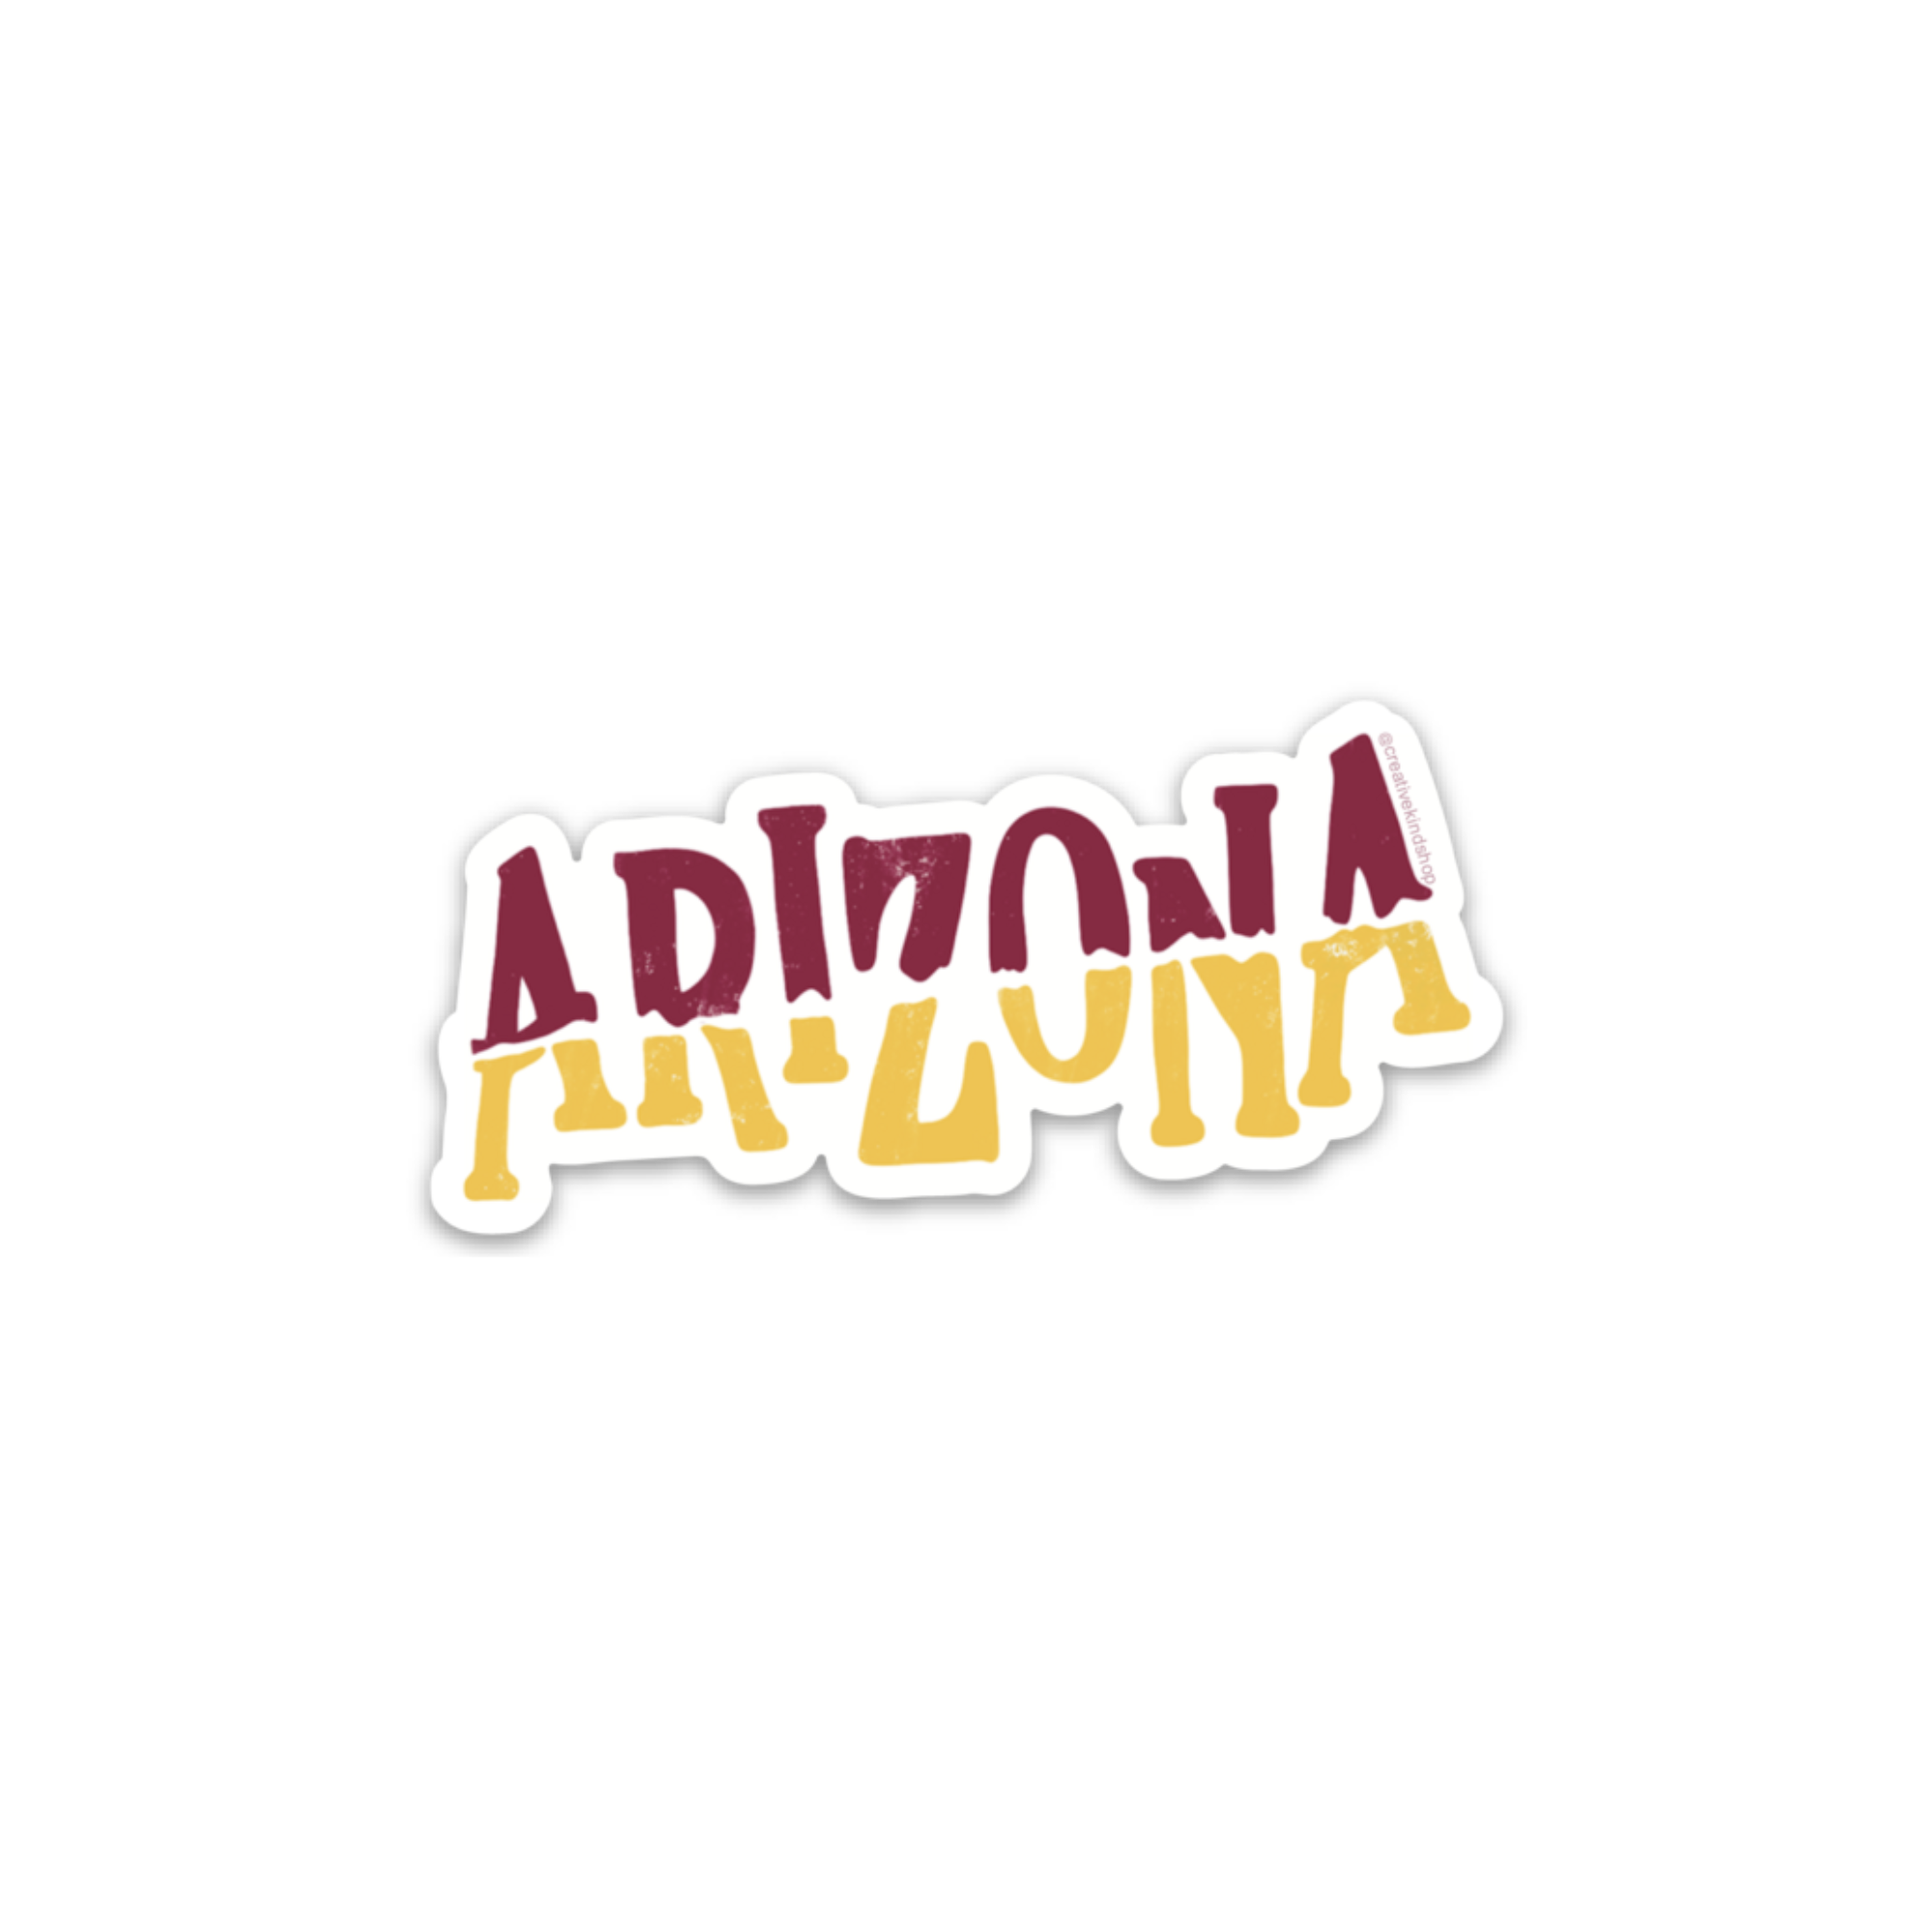 Die cut sticker of the word "Arizona" in maroon and gold